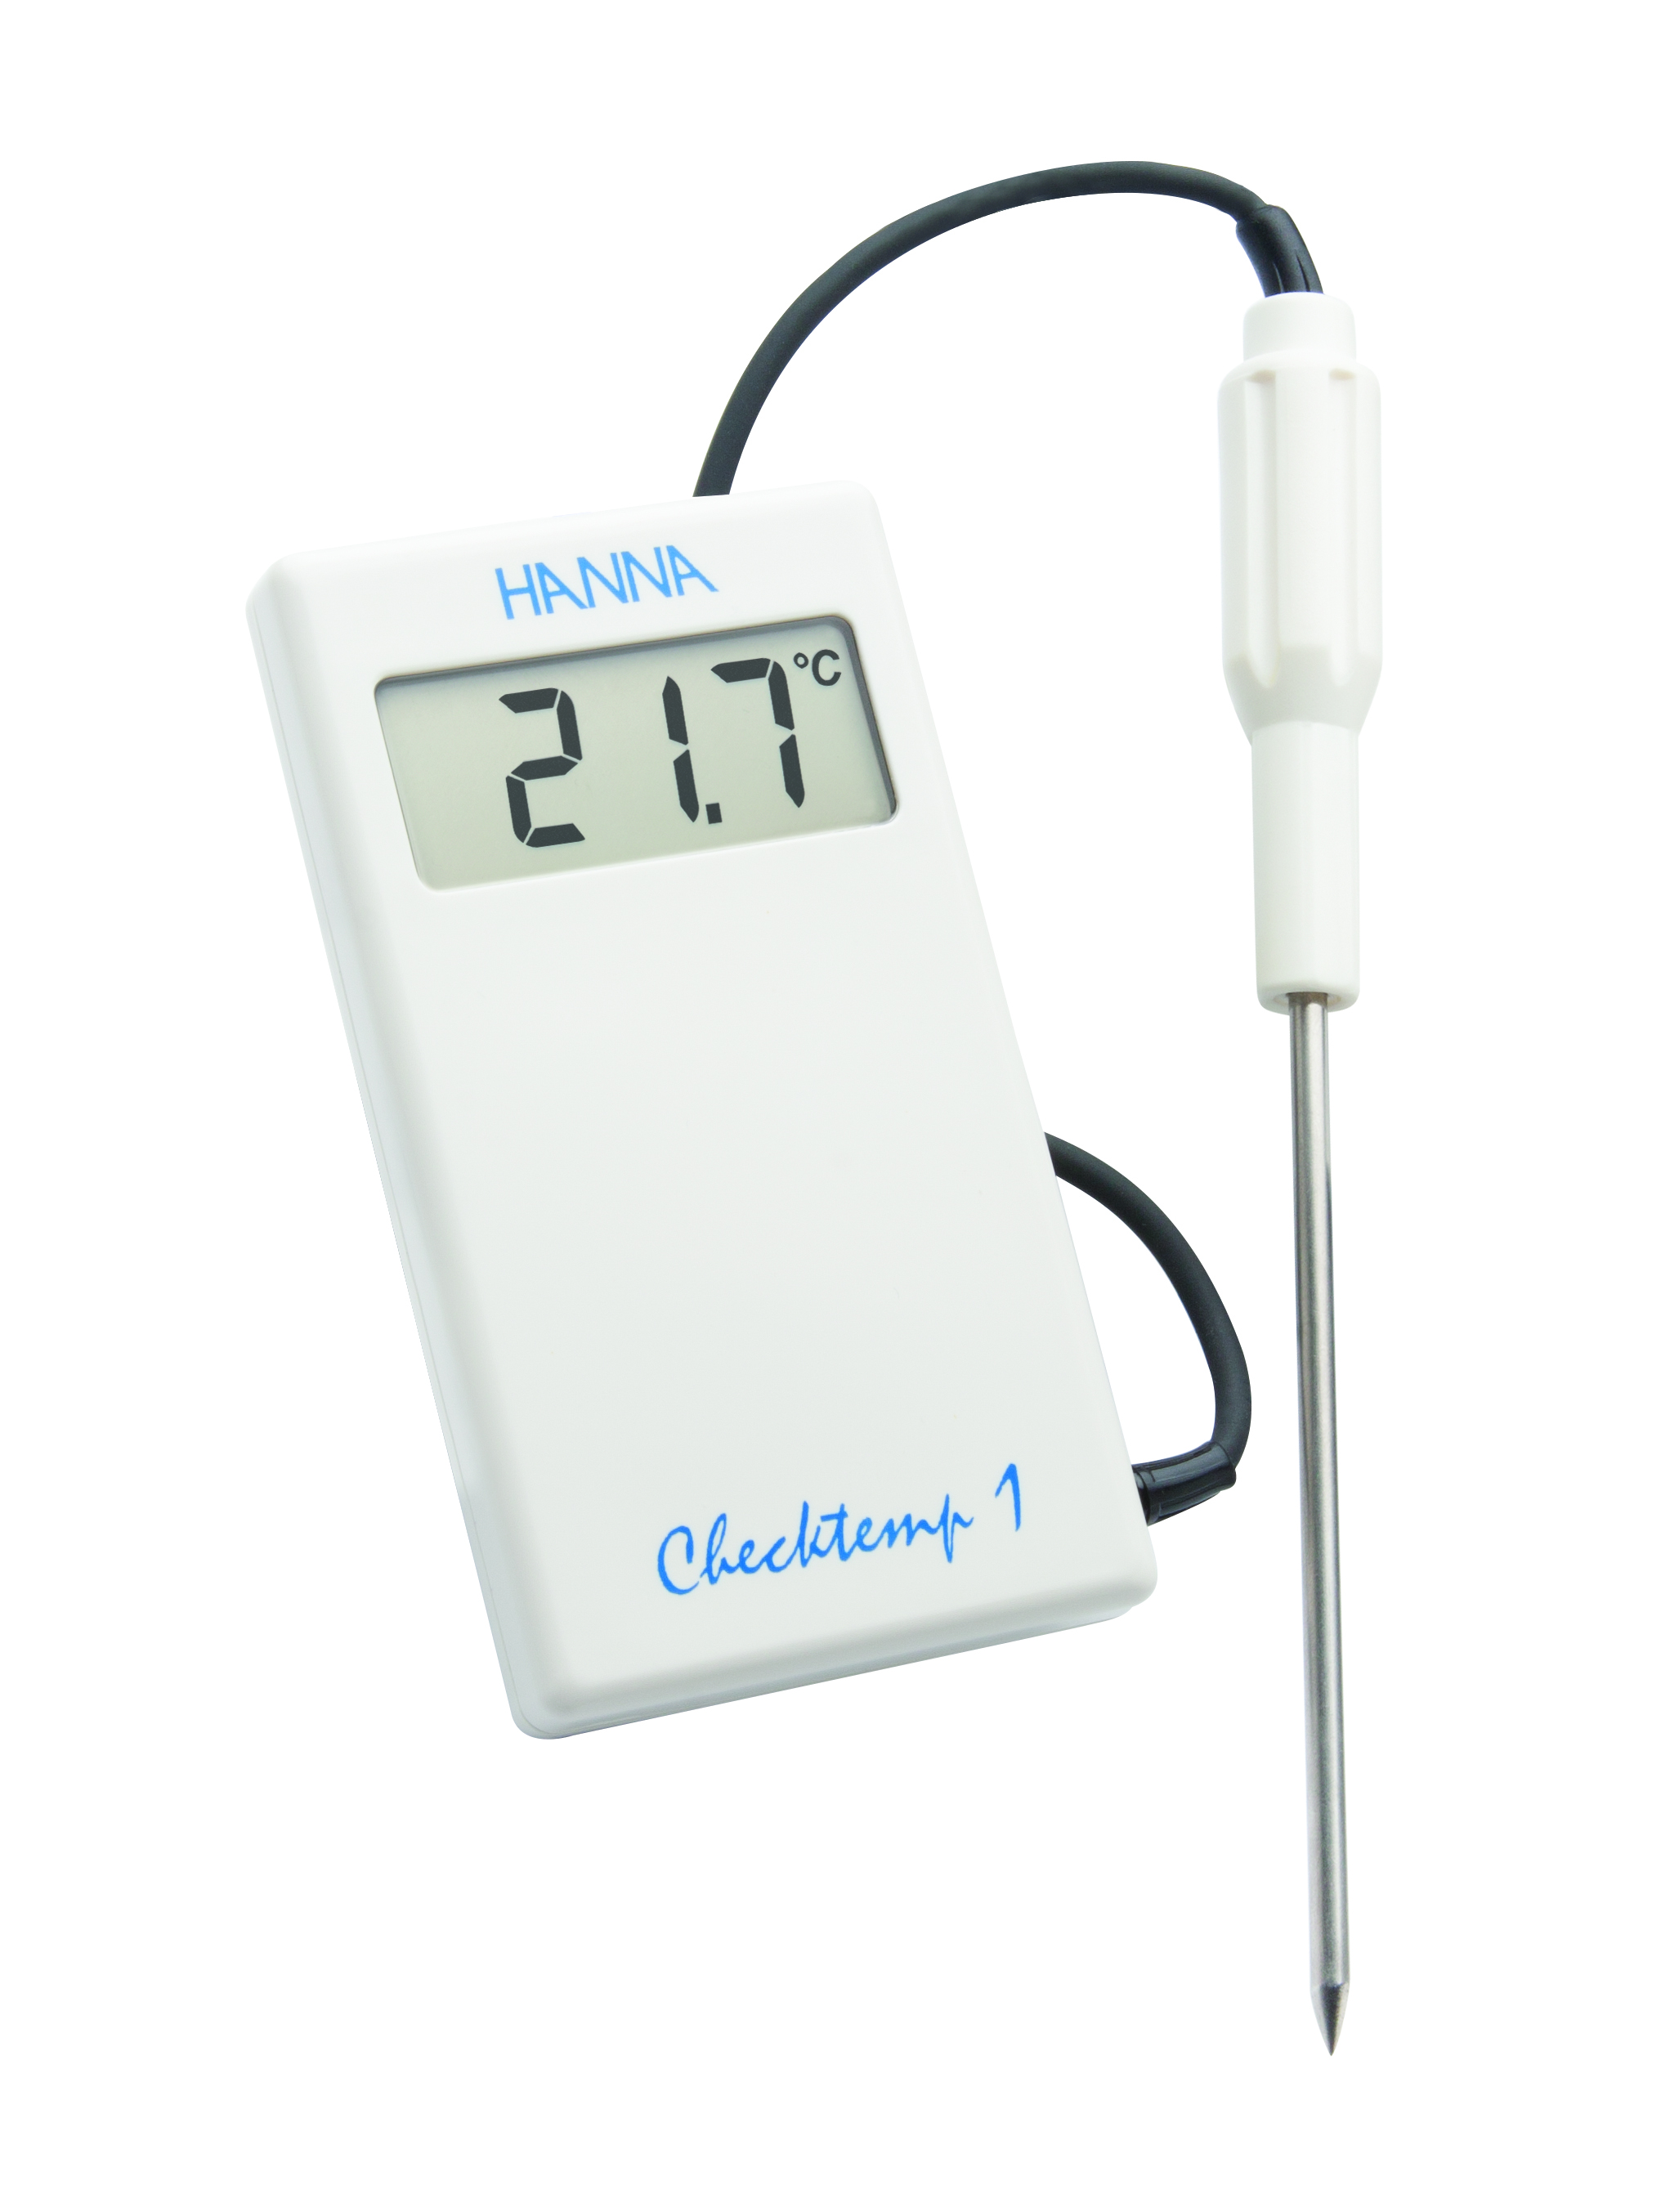 Checktemp® 1 digitales Thermometer